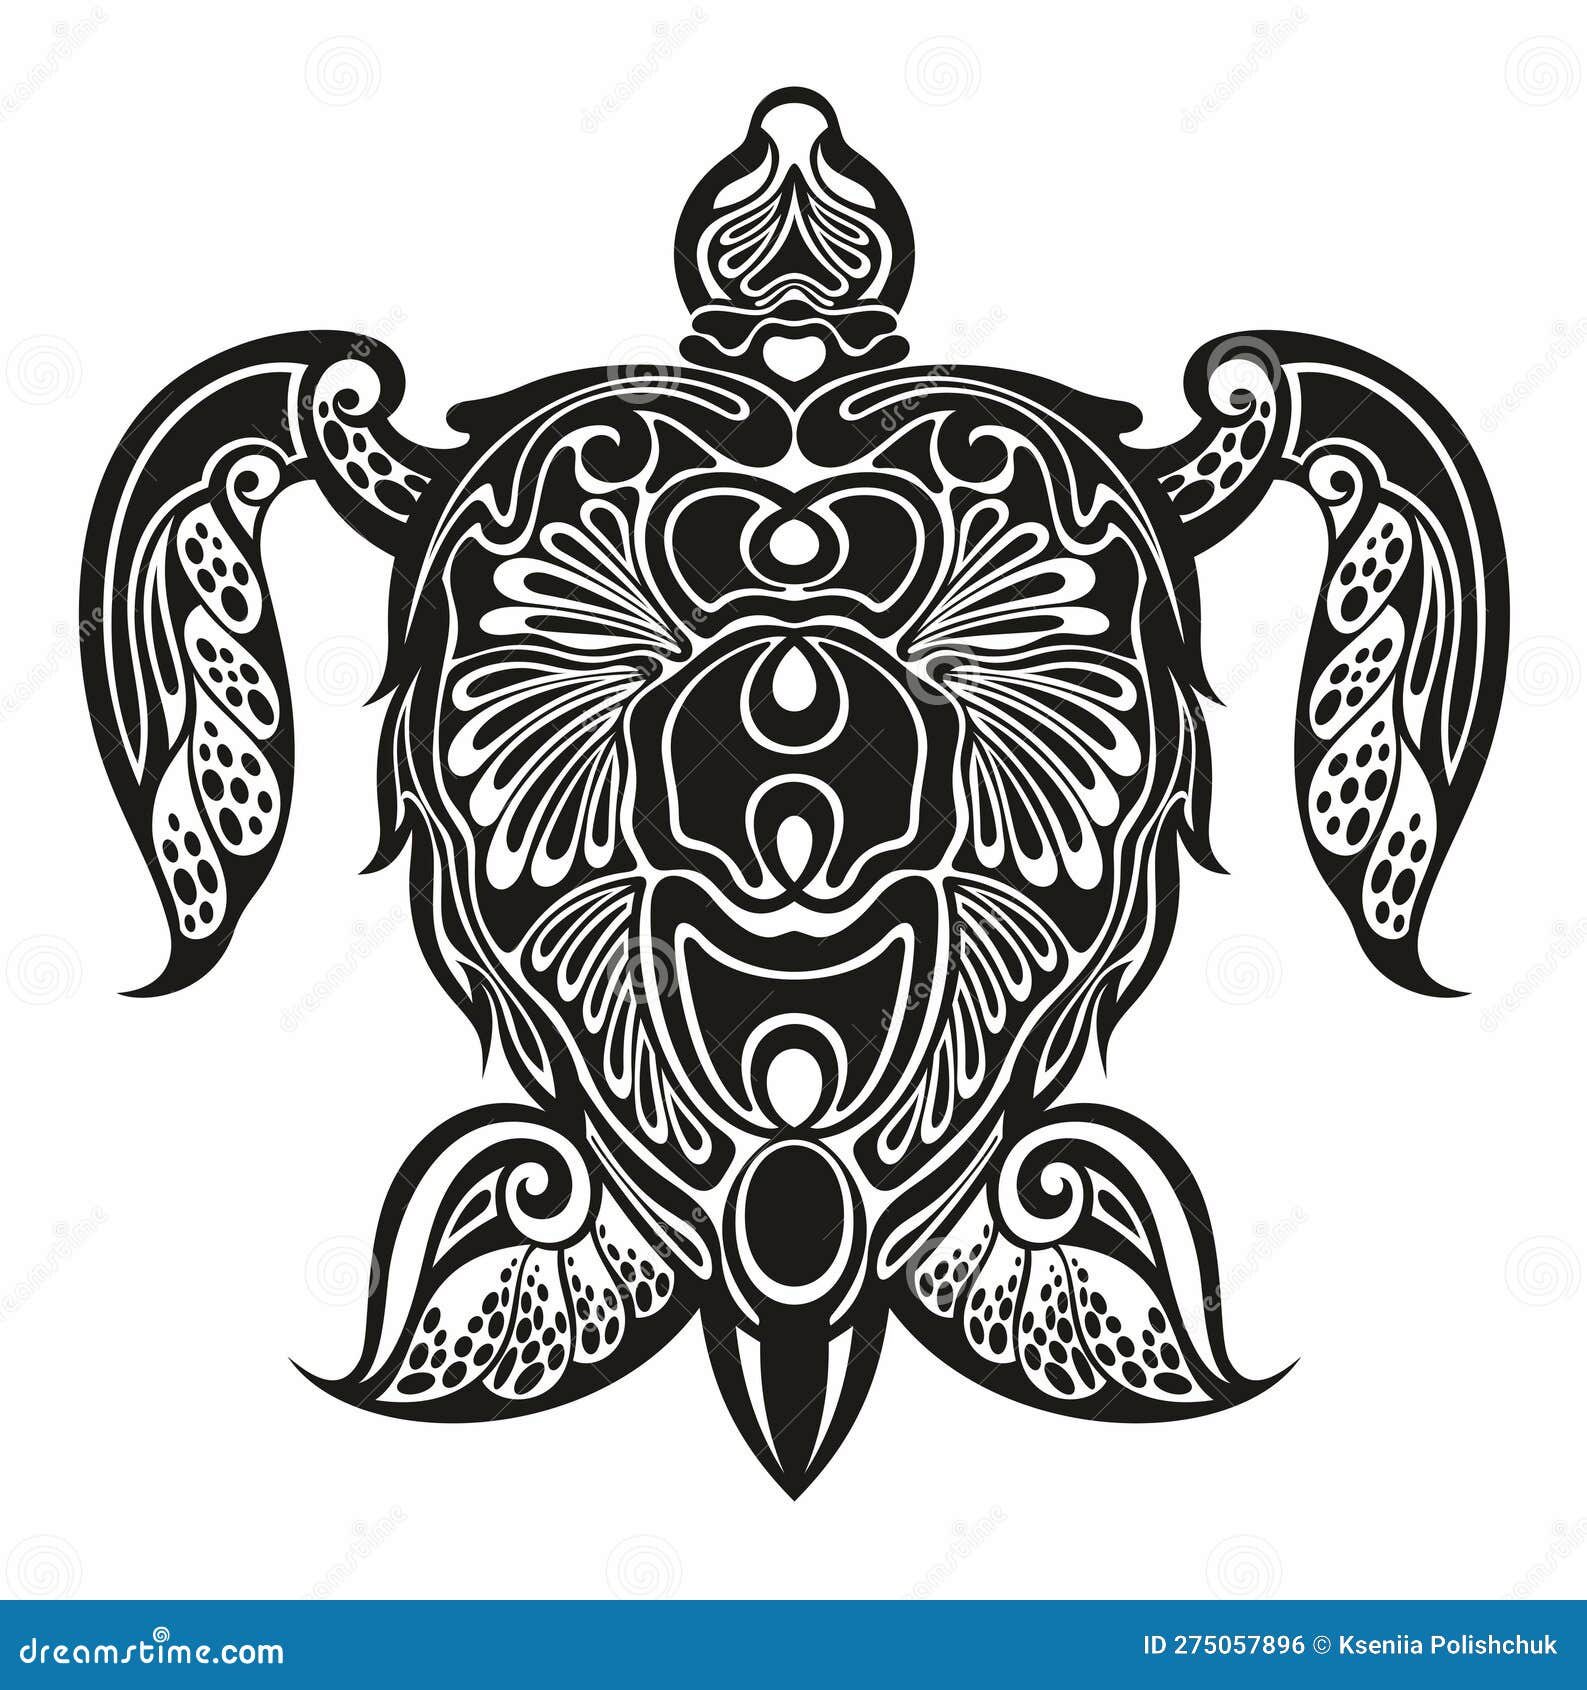 Turtle Tattoos  Polynesian and Hawaiian Tribal Turtle Designs  ClipArt  Best  ClipArt Best